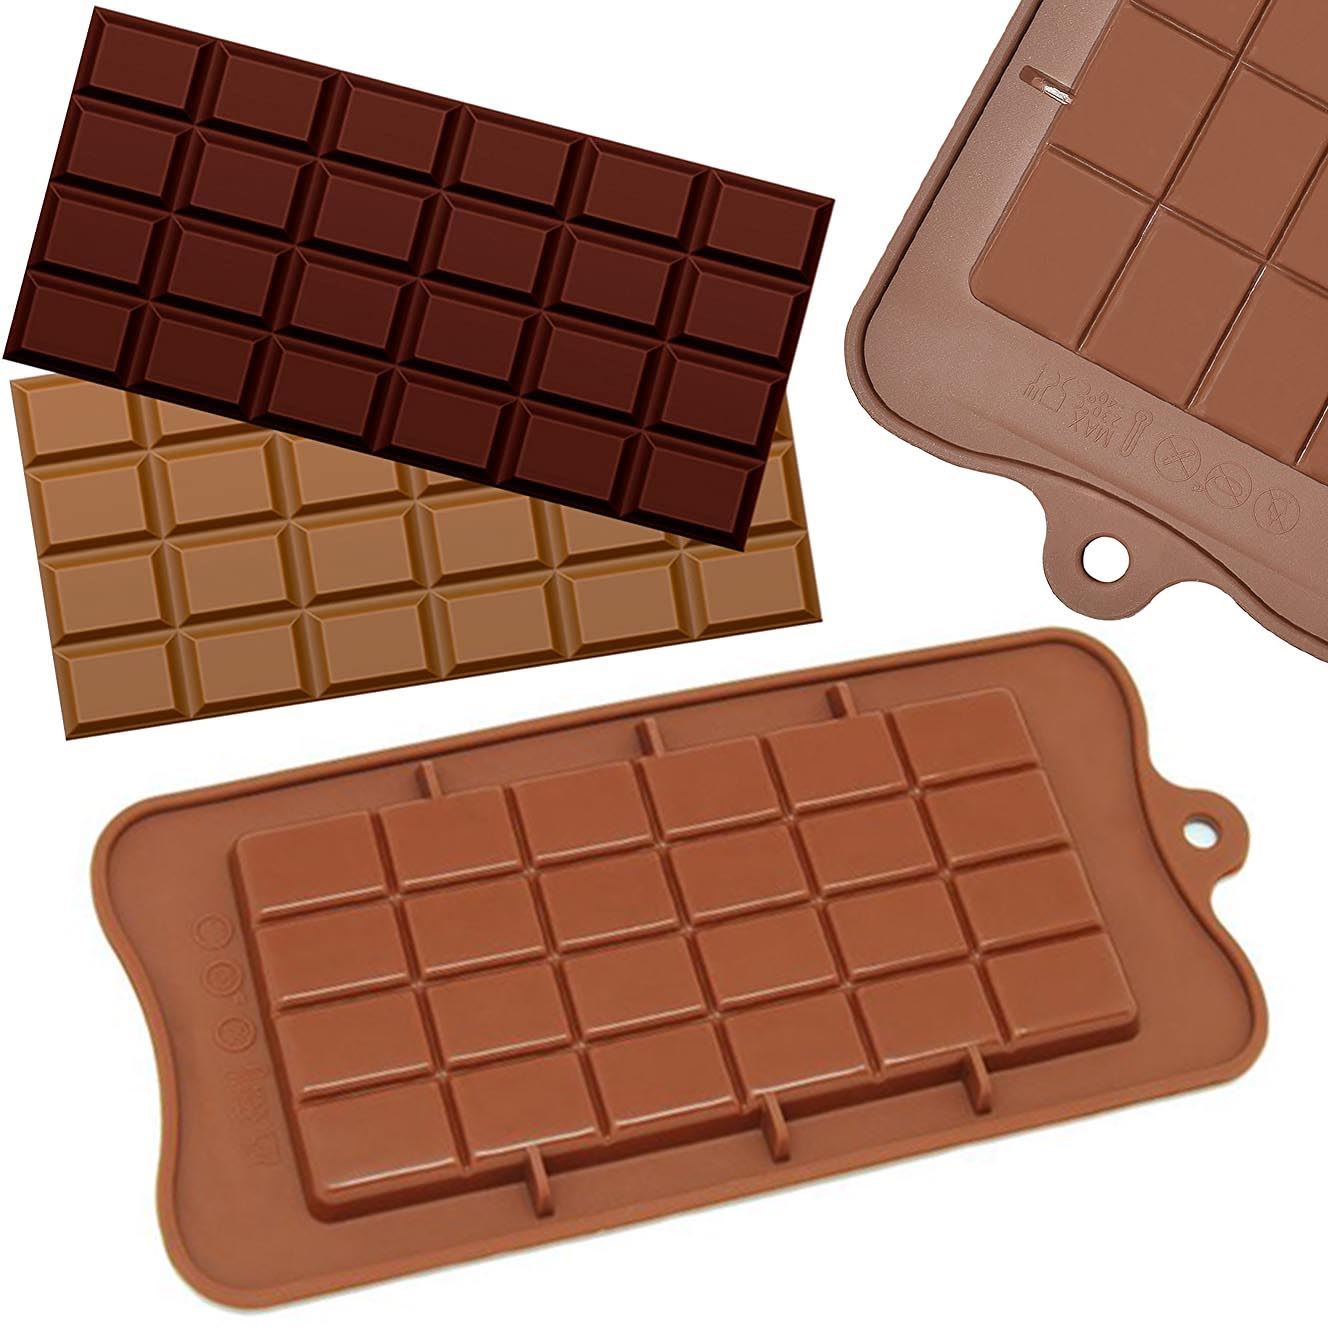 Chocolate Bar Block Silicone Mould